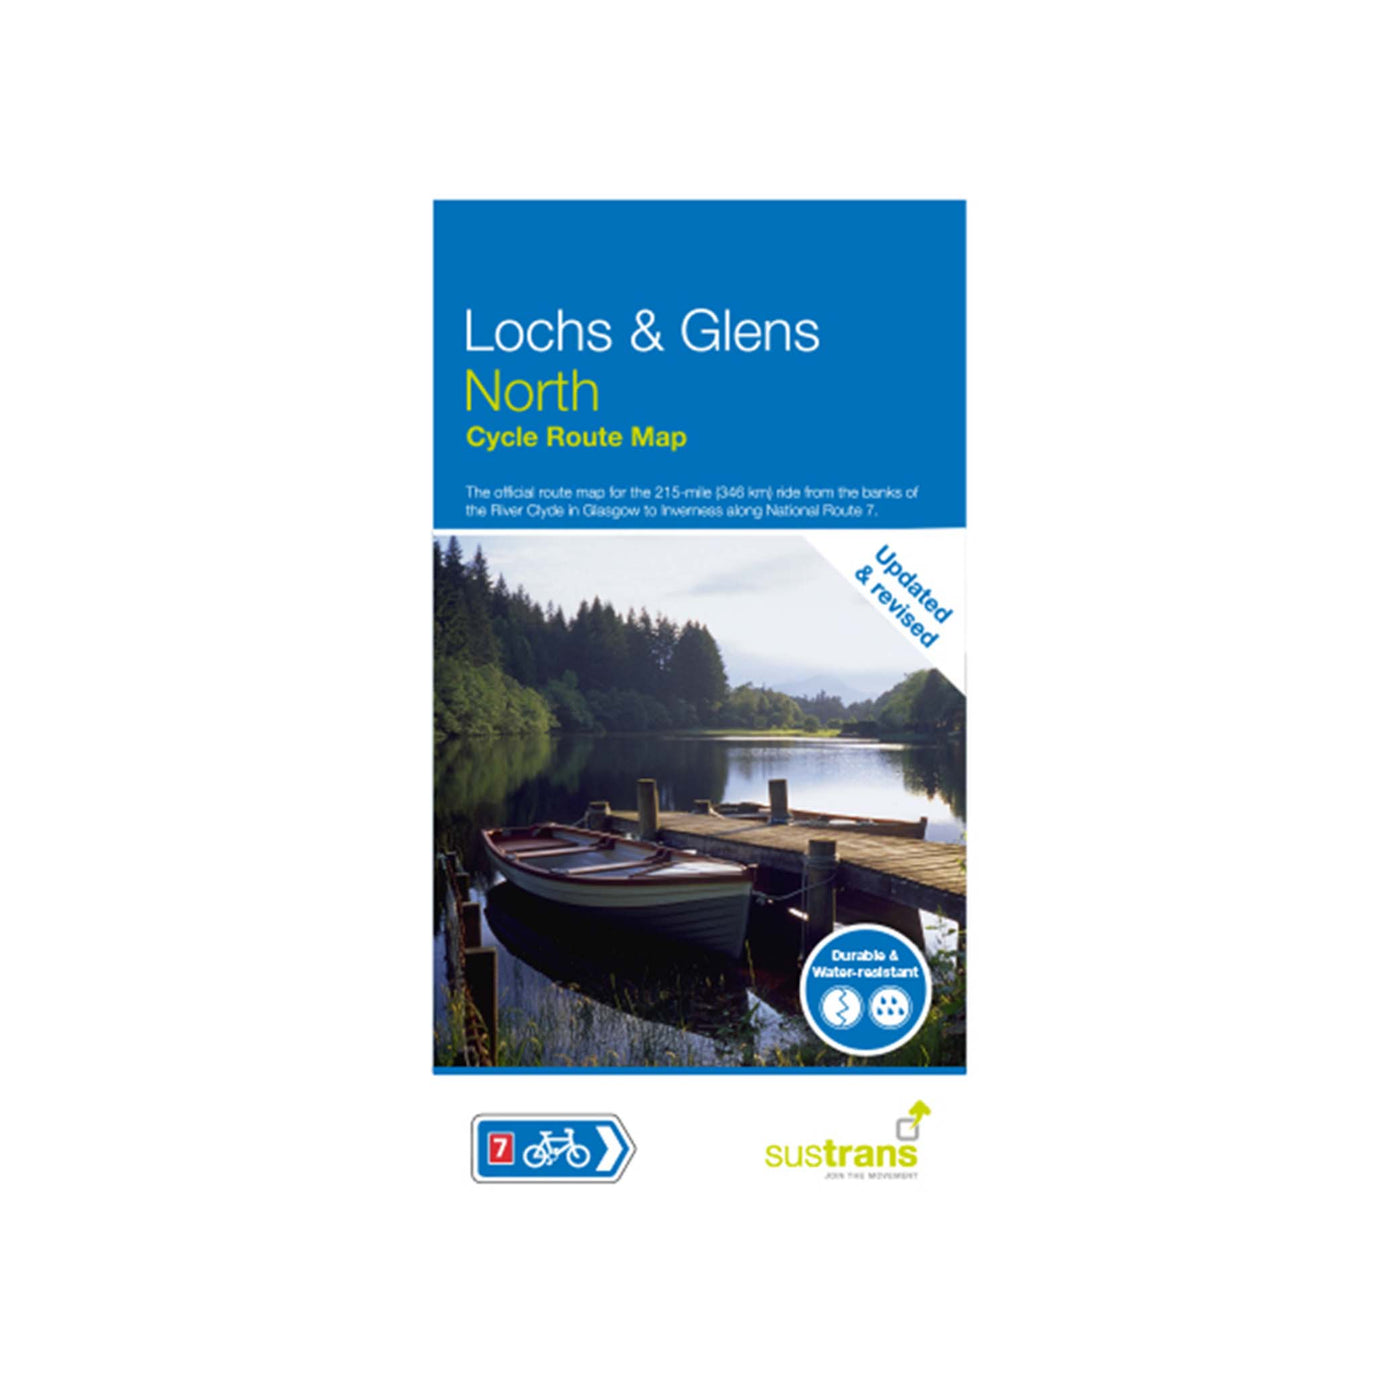 Loch and Glens North cycle route map - River Clyde in Glasgow to Inverness